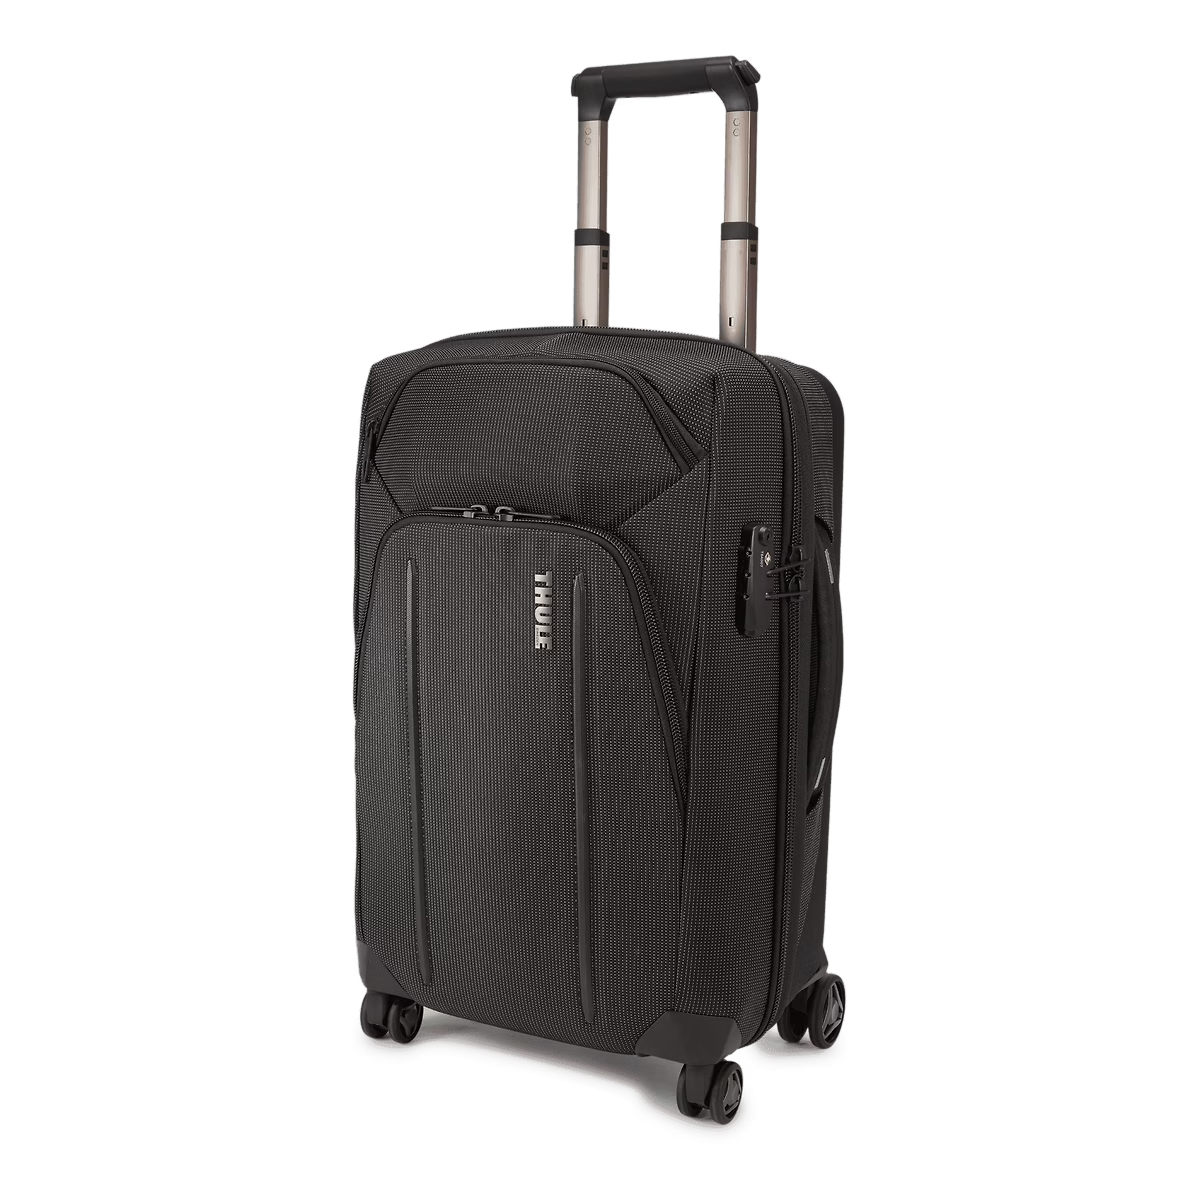 THULE Crossover 2 Carry On Spinner BLACK